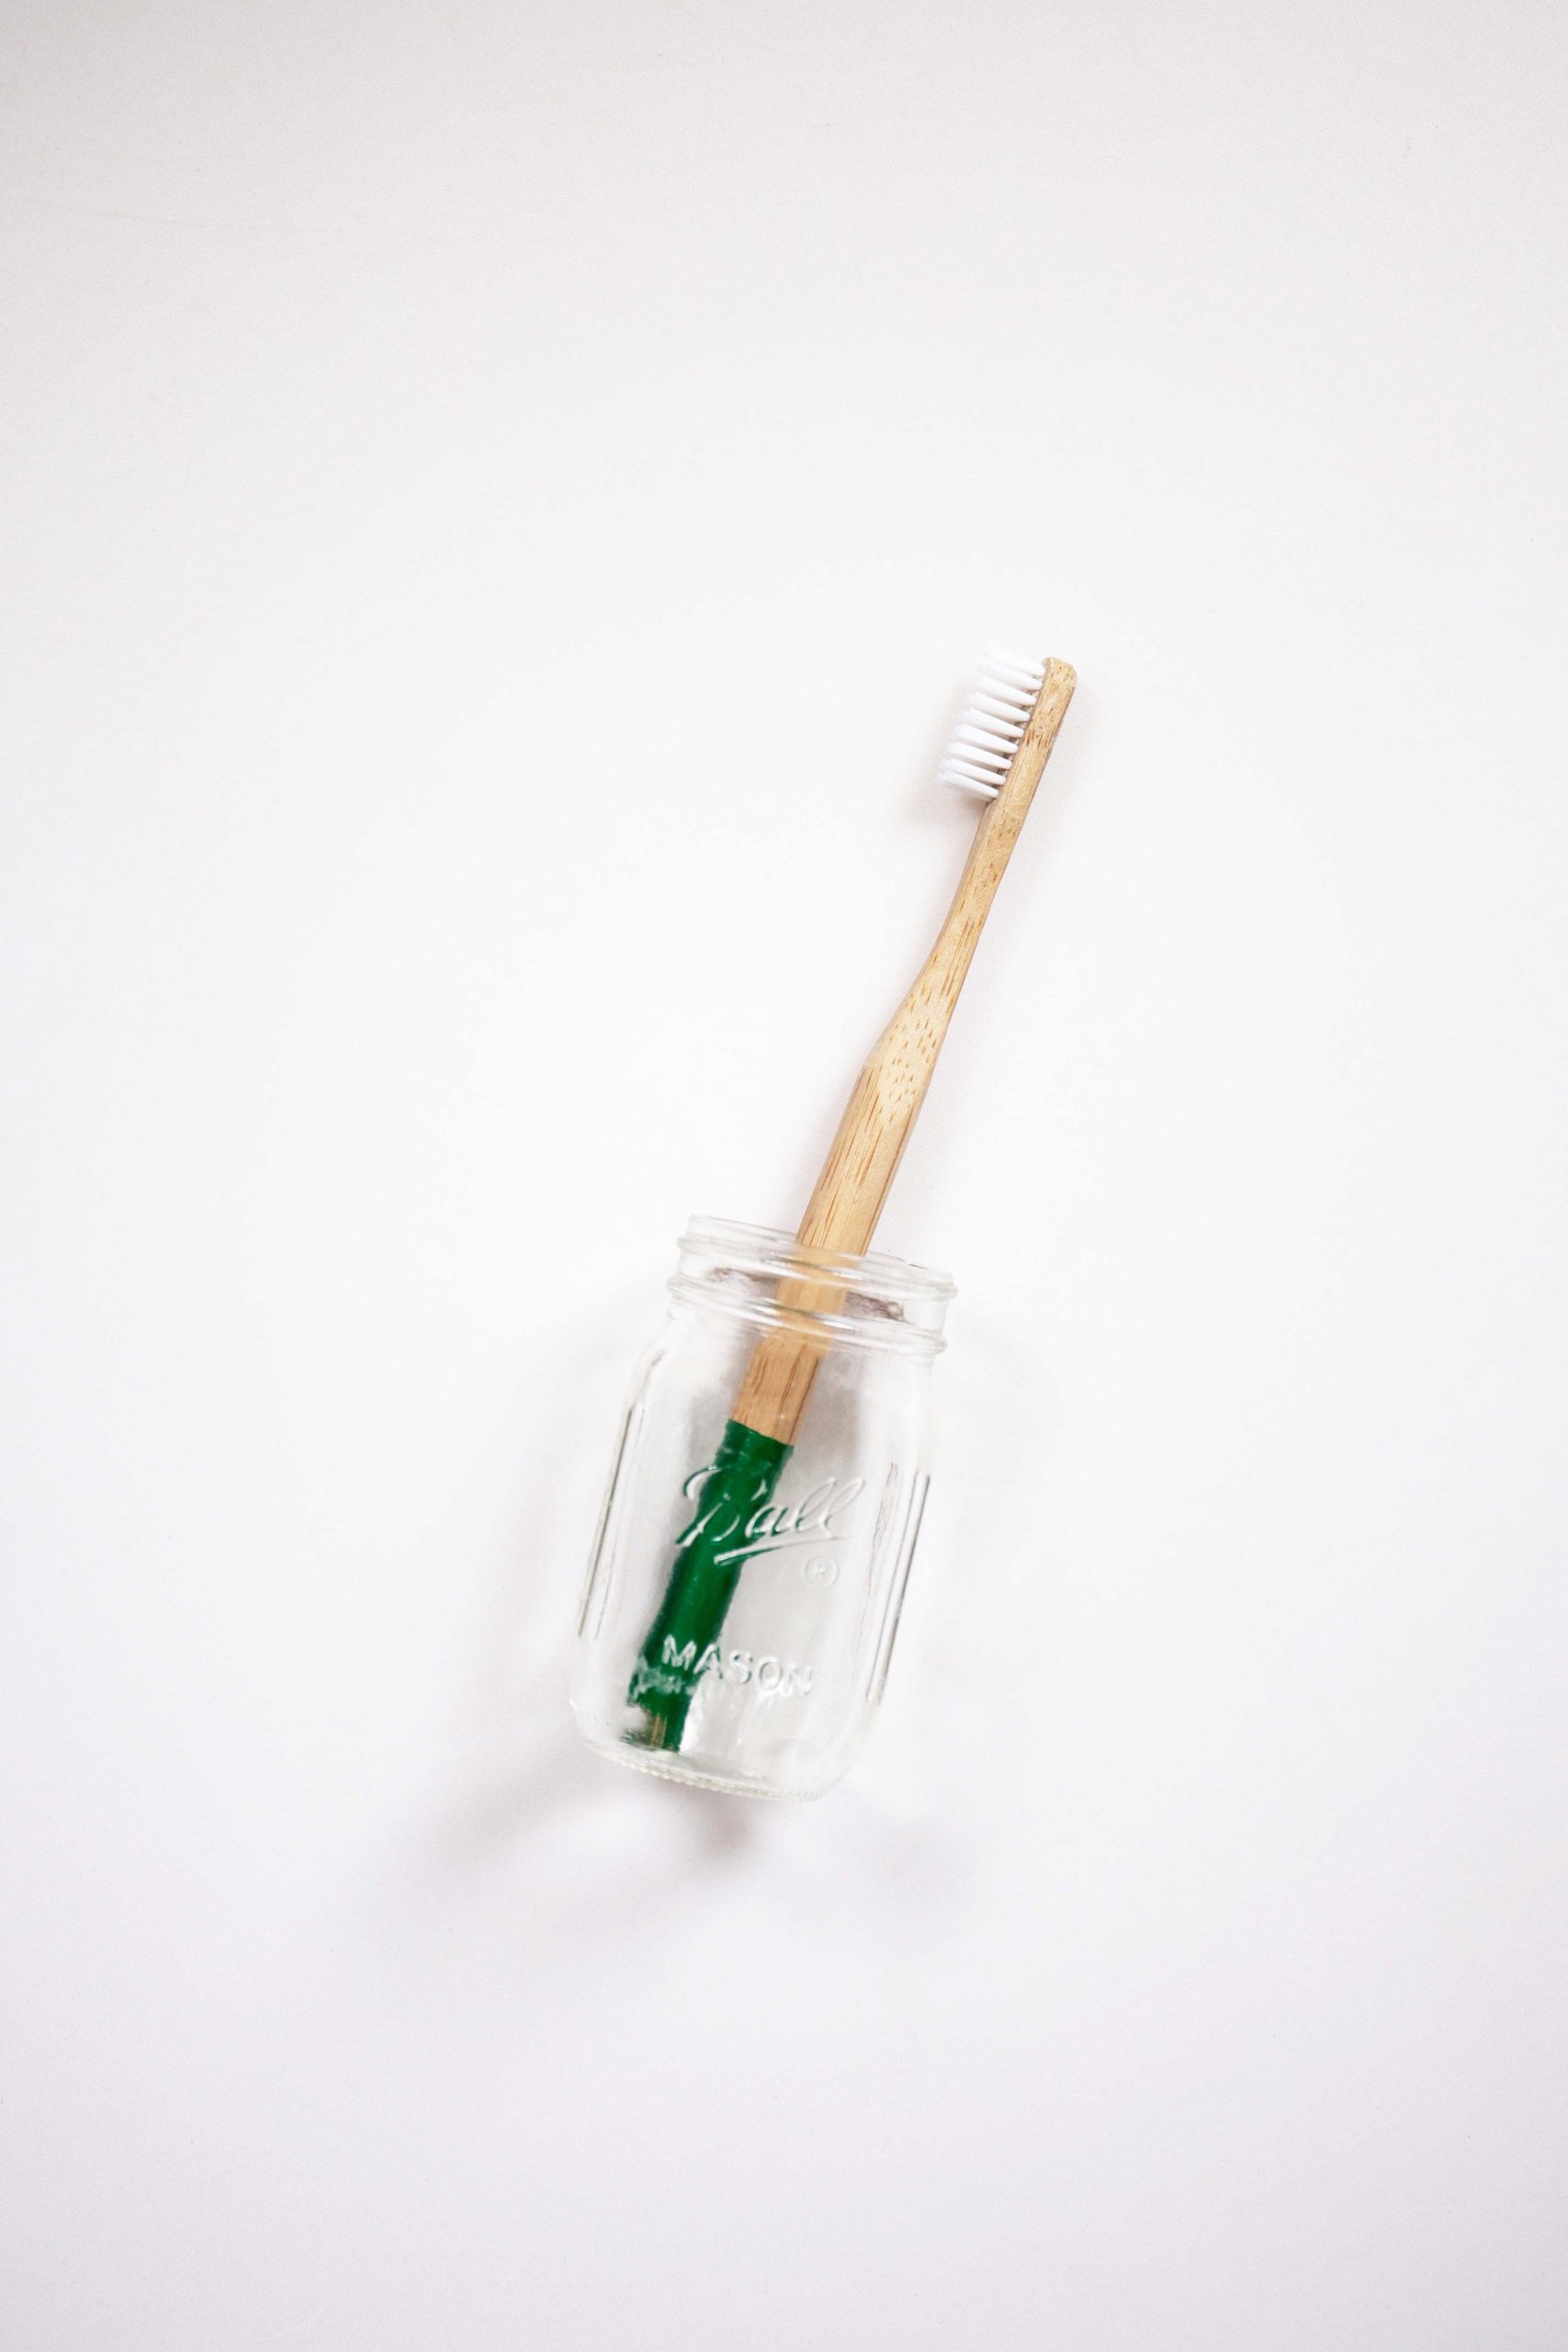 Toothbrush and homemade microwave cleaner together in a small glass jar.